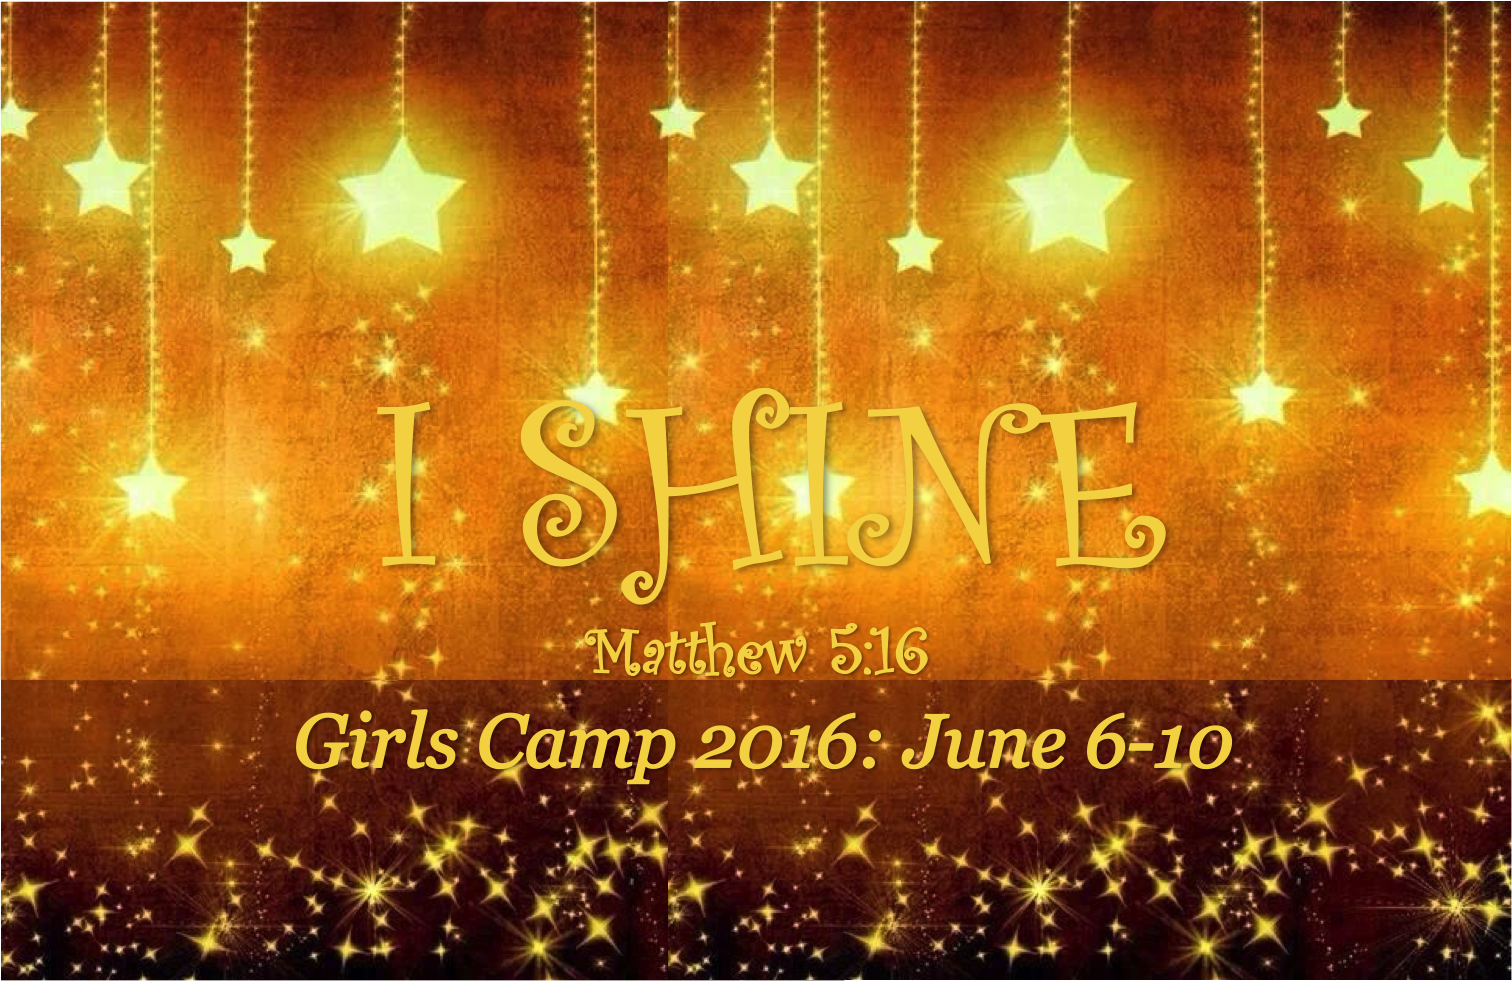 Lafayette Stake Young Women Camp